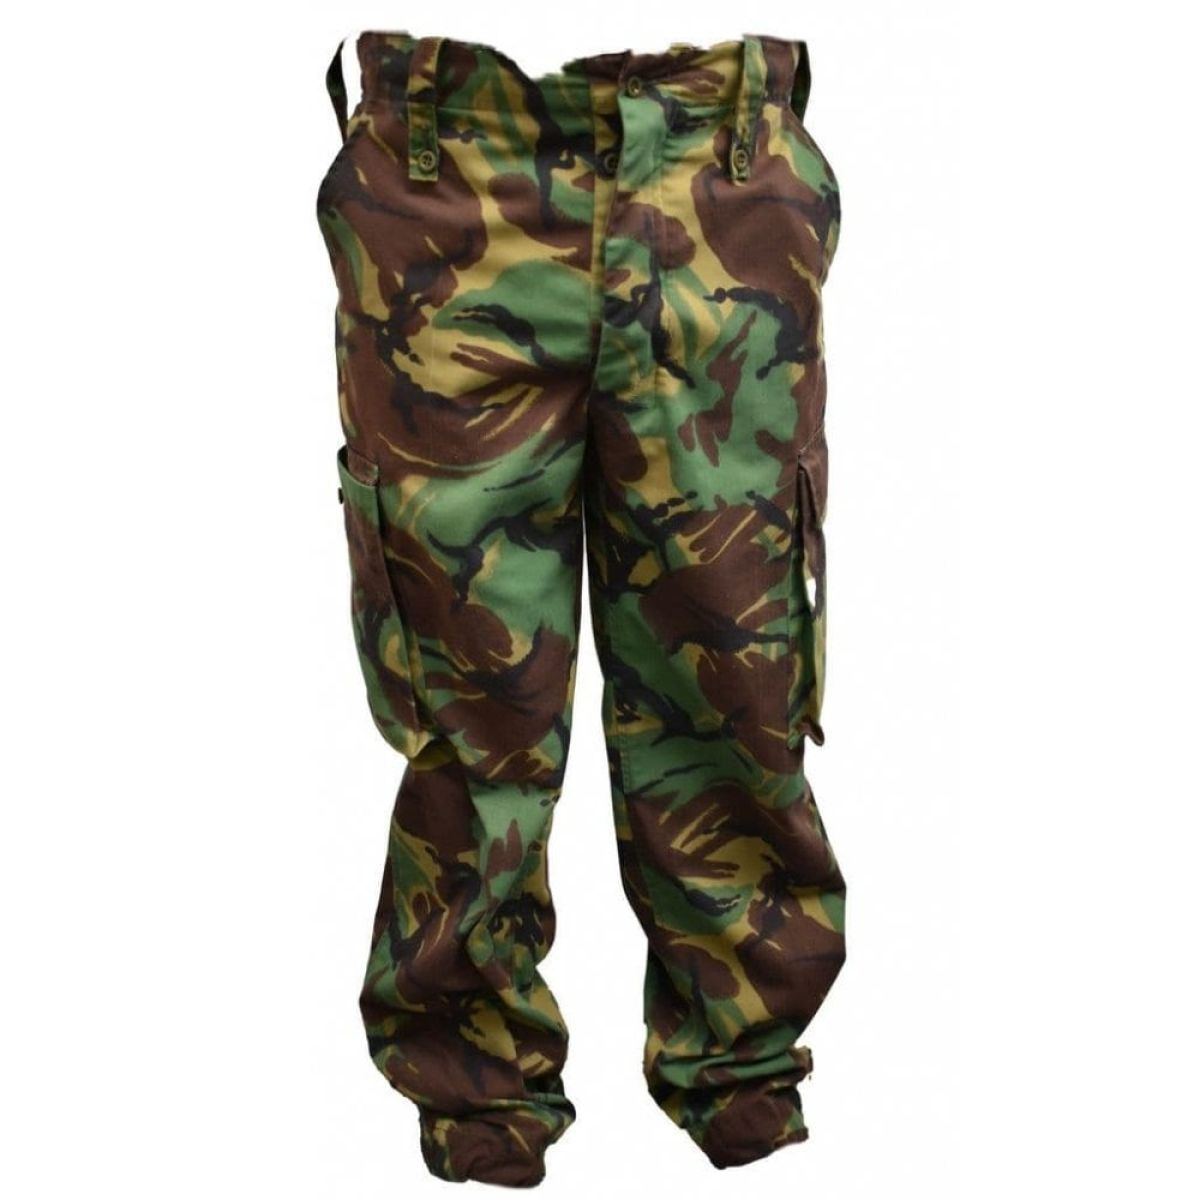 British Military Soldier 95 DPM Trousers - 32